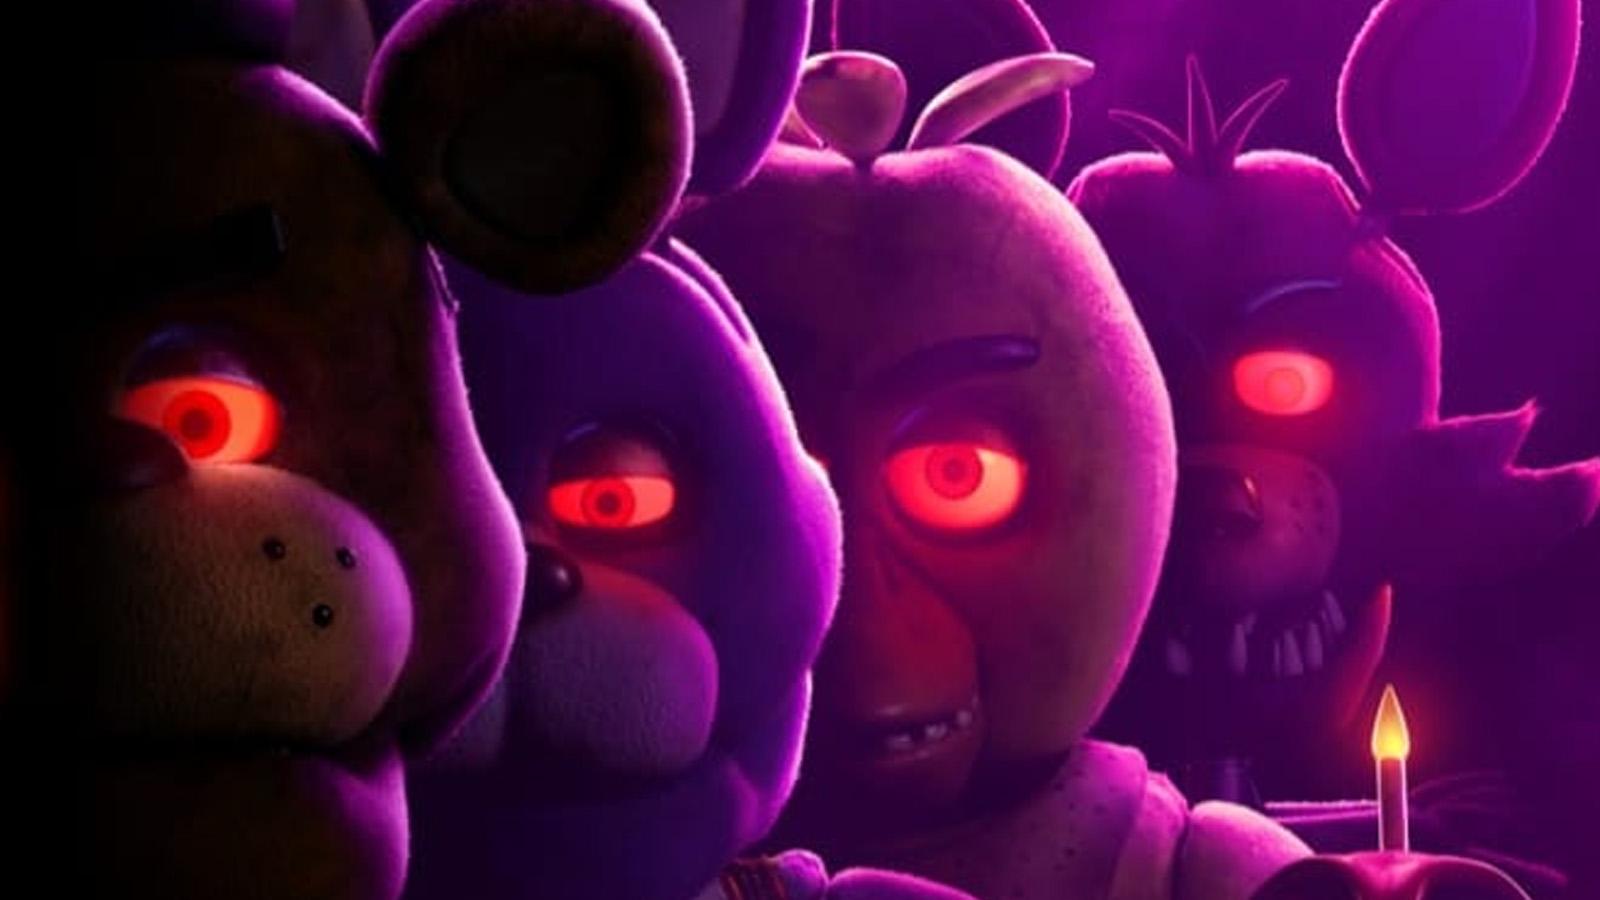 Five Nights at Freddy's movie expected to have 3-hour runtime - Dexerto